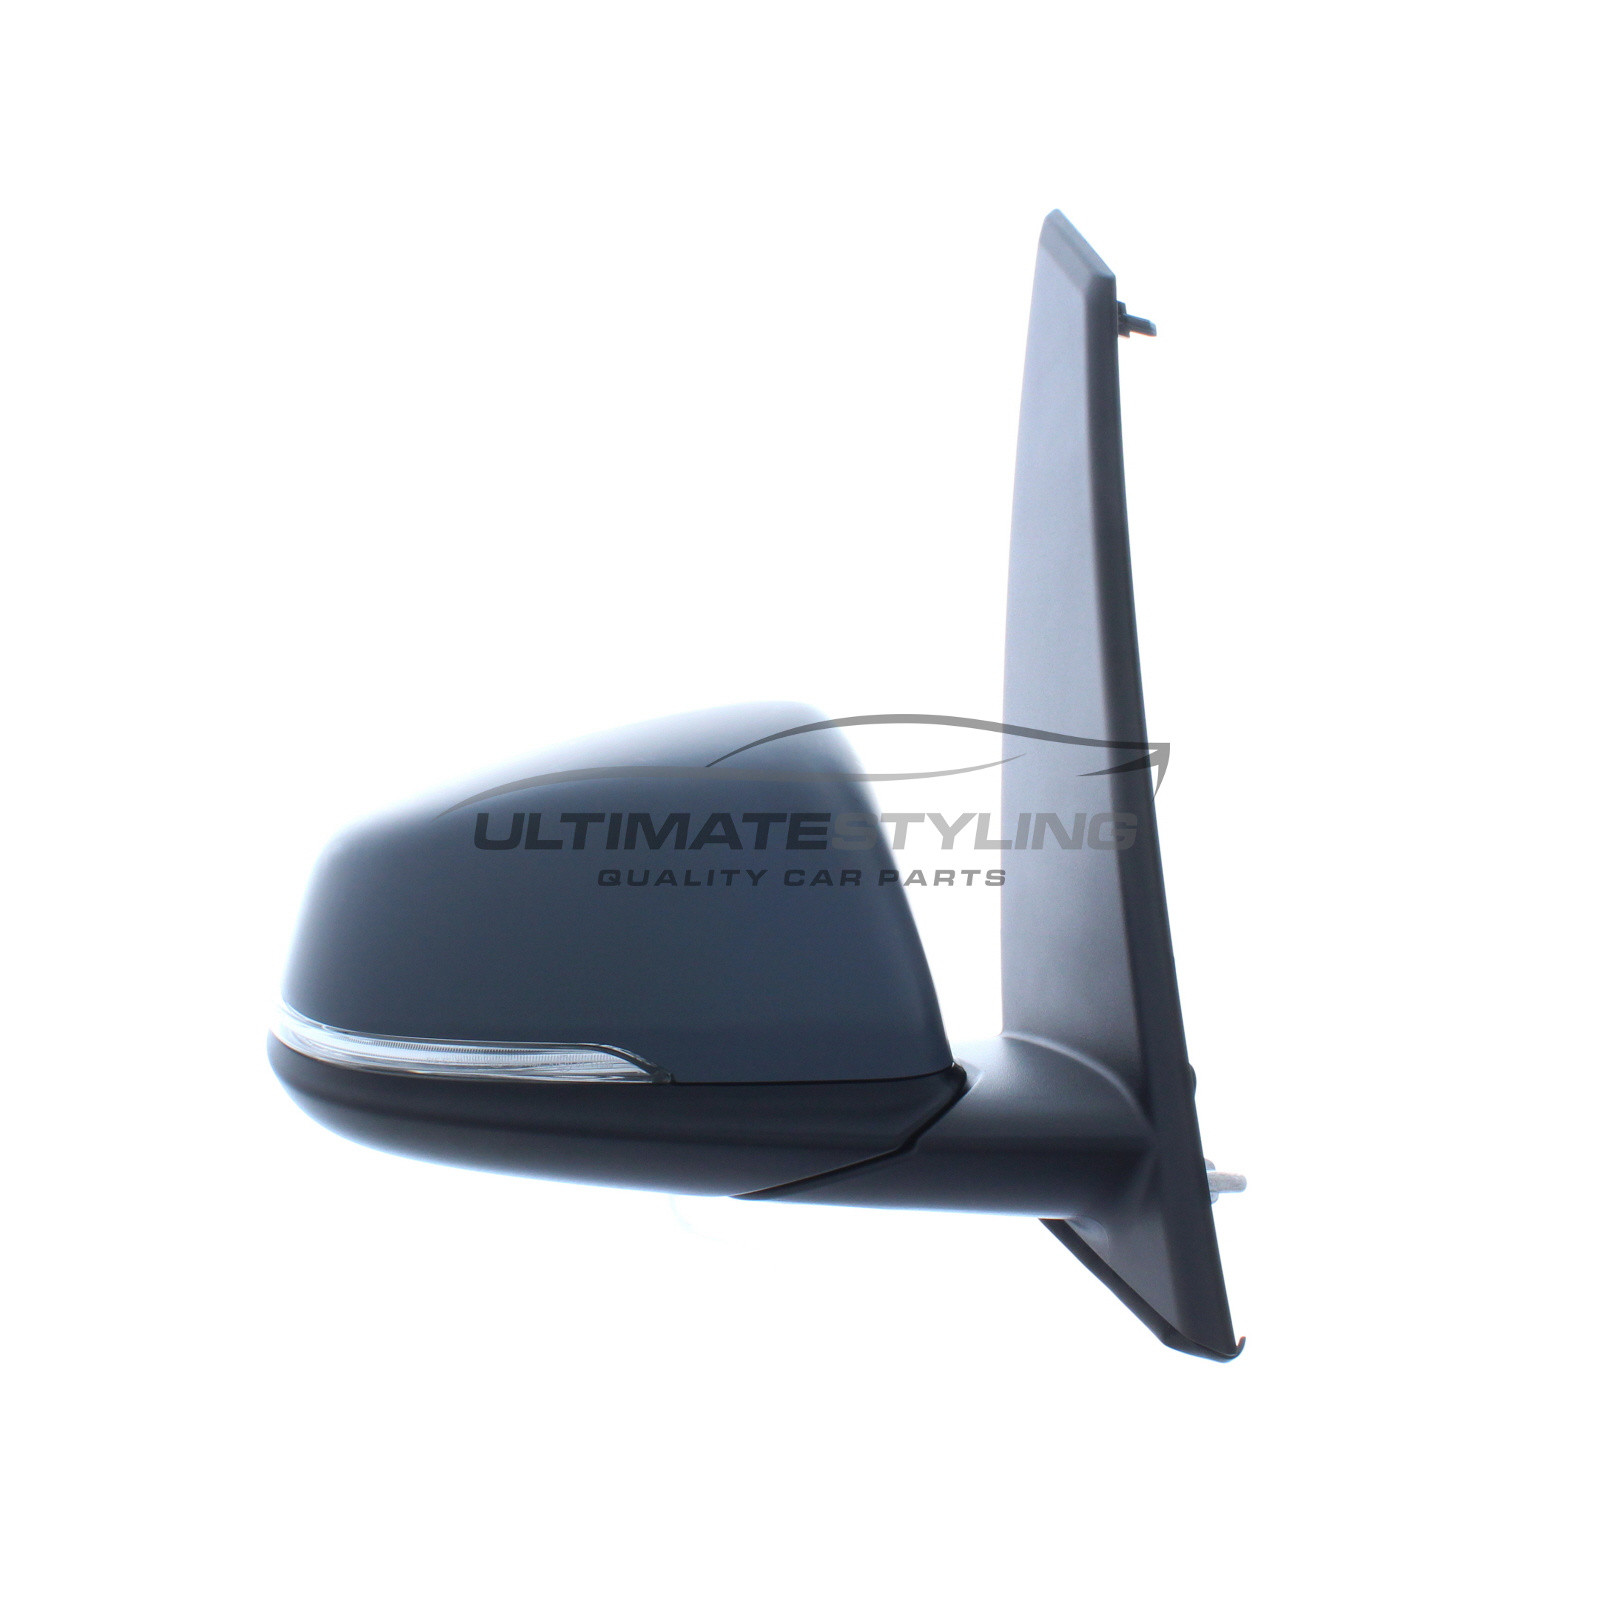 BMW 2 Series Wing Mirror / Door Mirror - Drivers Side (RH) - Electric adjustment - Heated Glass - Indicator - Puddle Light - Primed